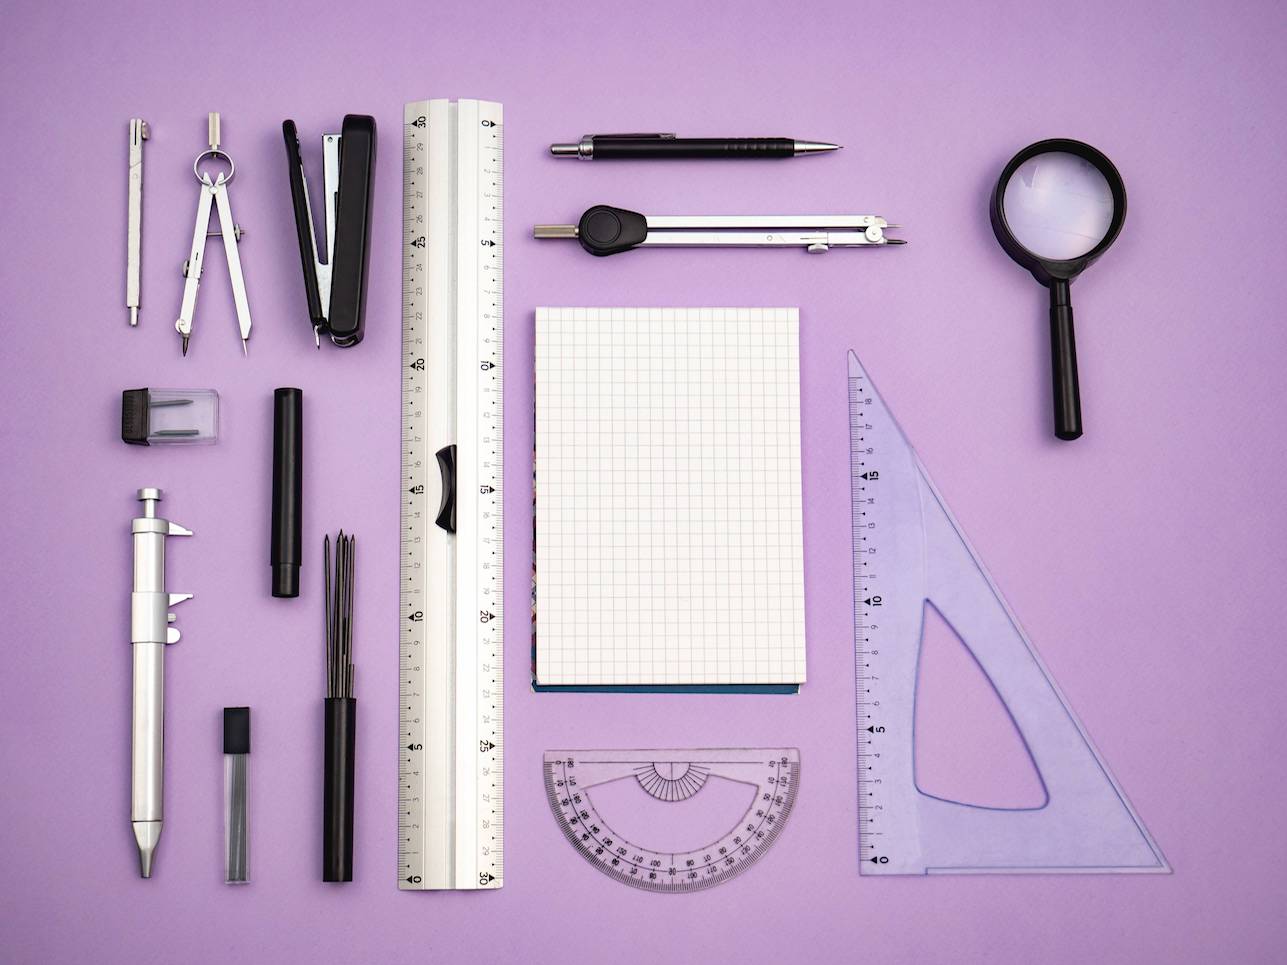 An array of stationary and tools for drawing and design on a pink background.